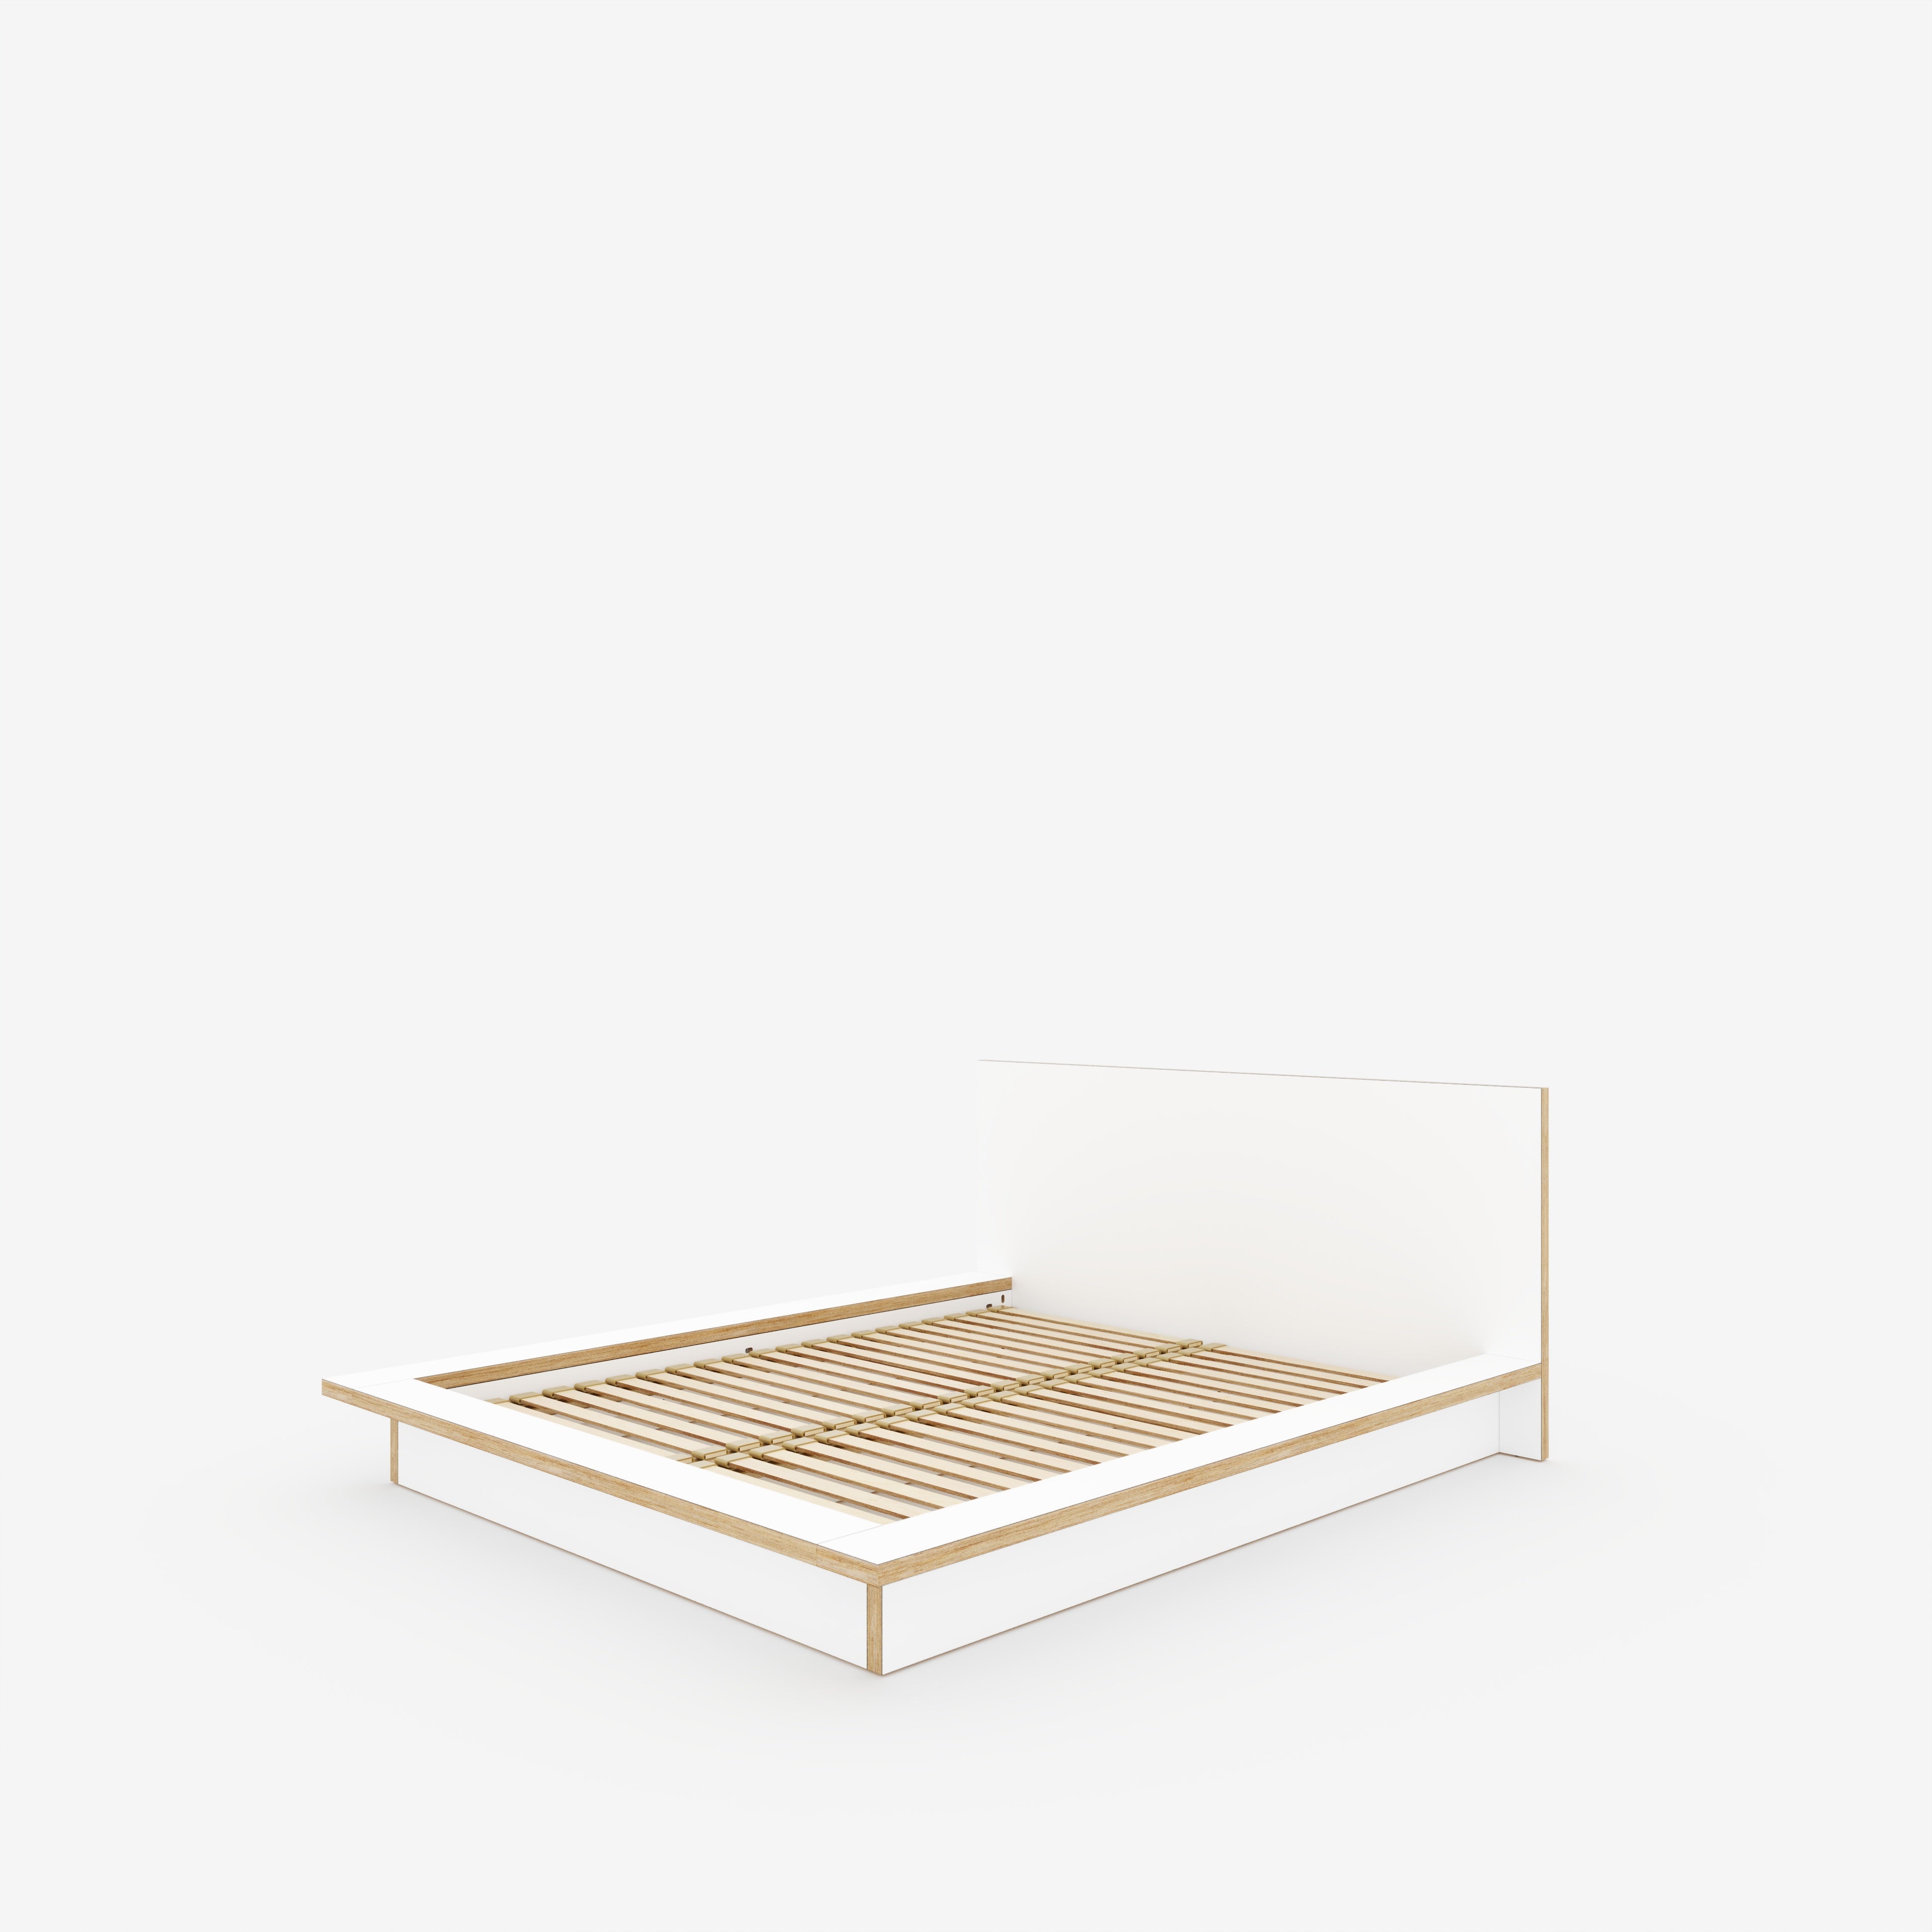 Plywood Platform Bed - Plywood Formica White - European King 1600(w) x 2000(d) Low